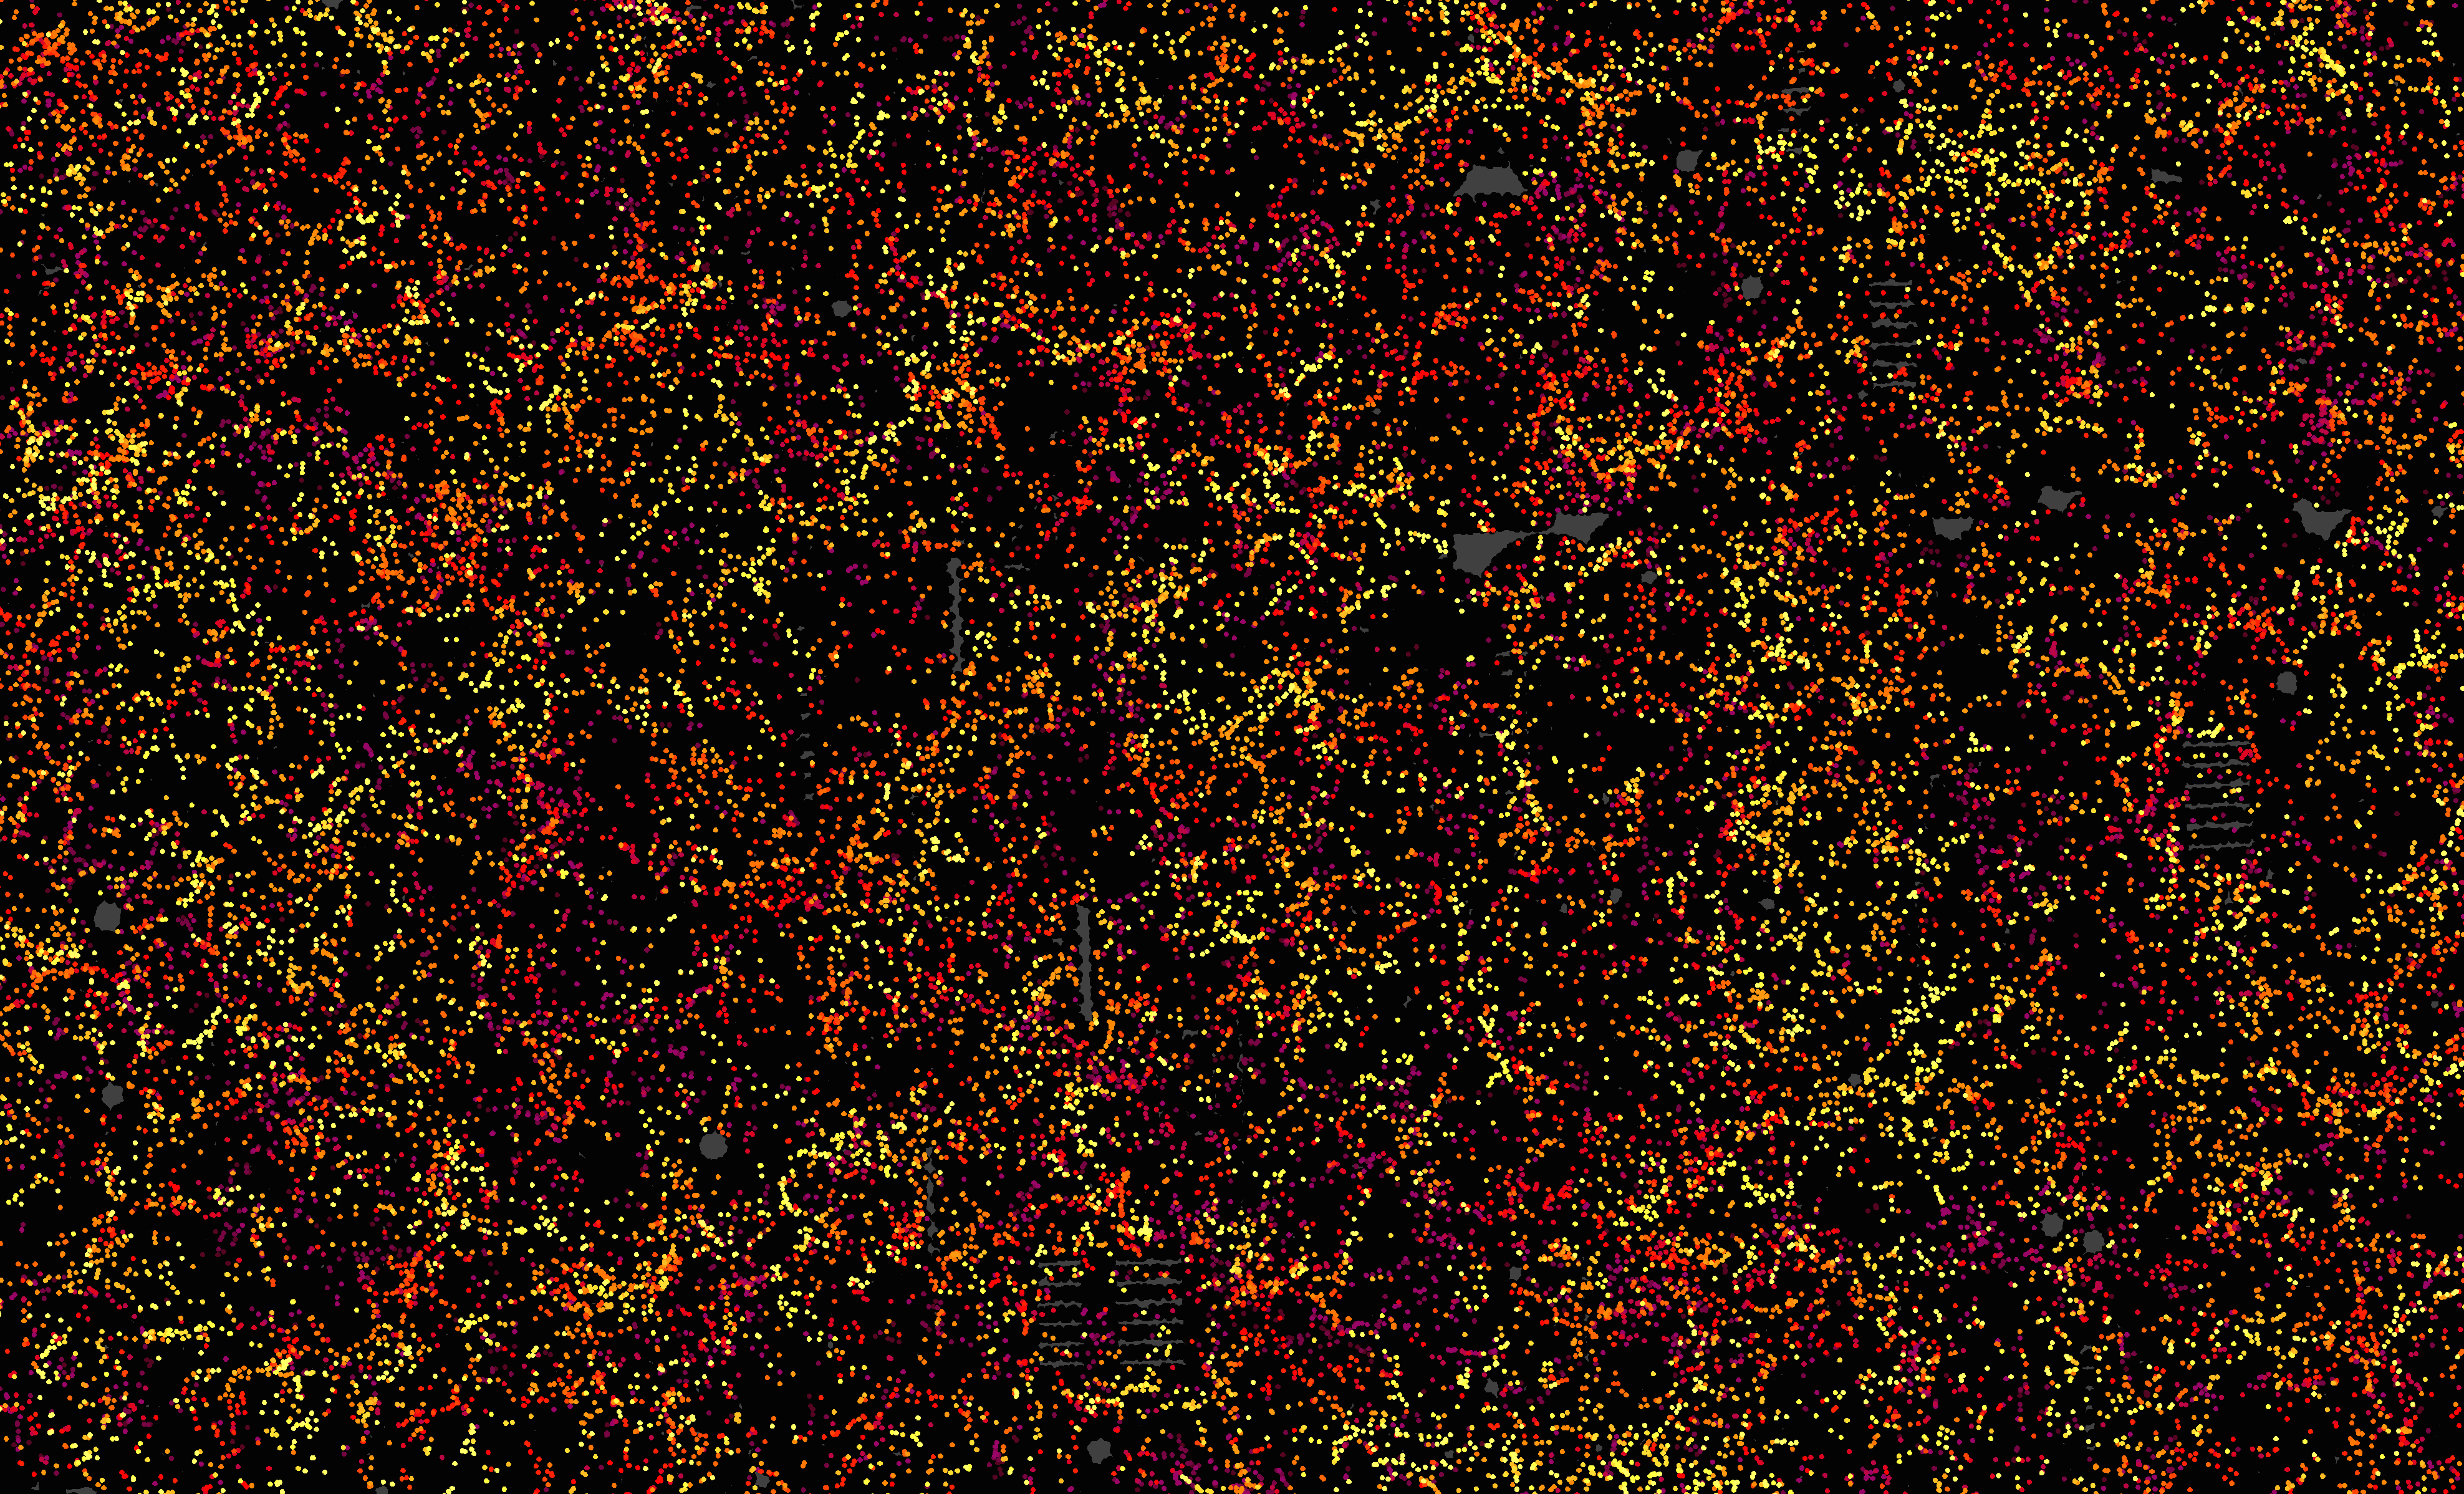 One slice through the map of the large-scale structure of the Universe.